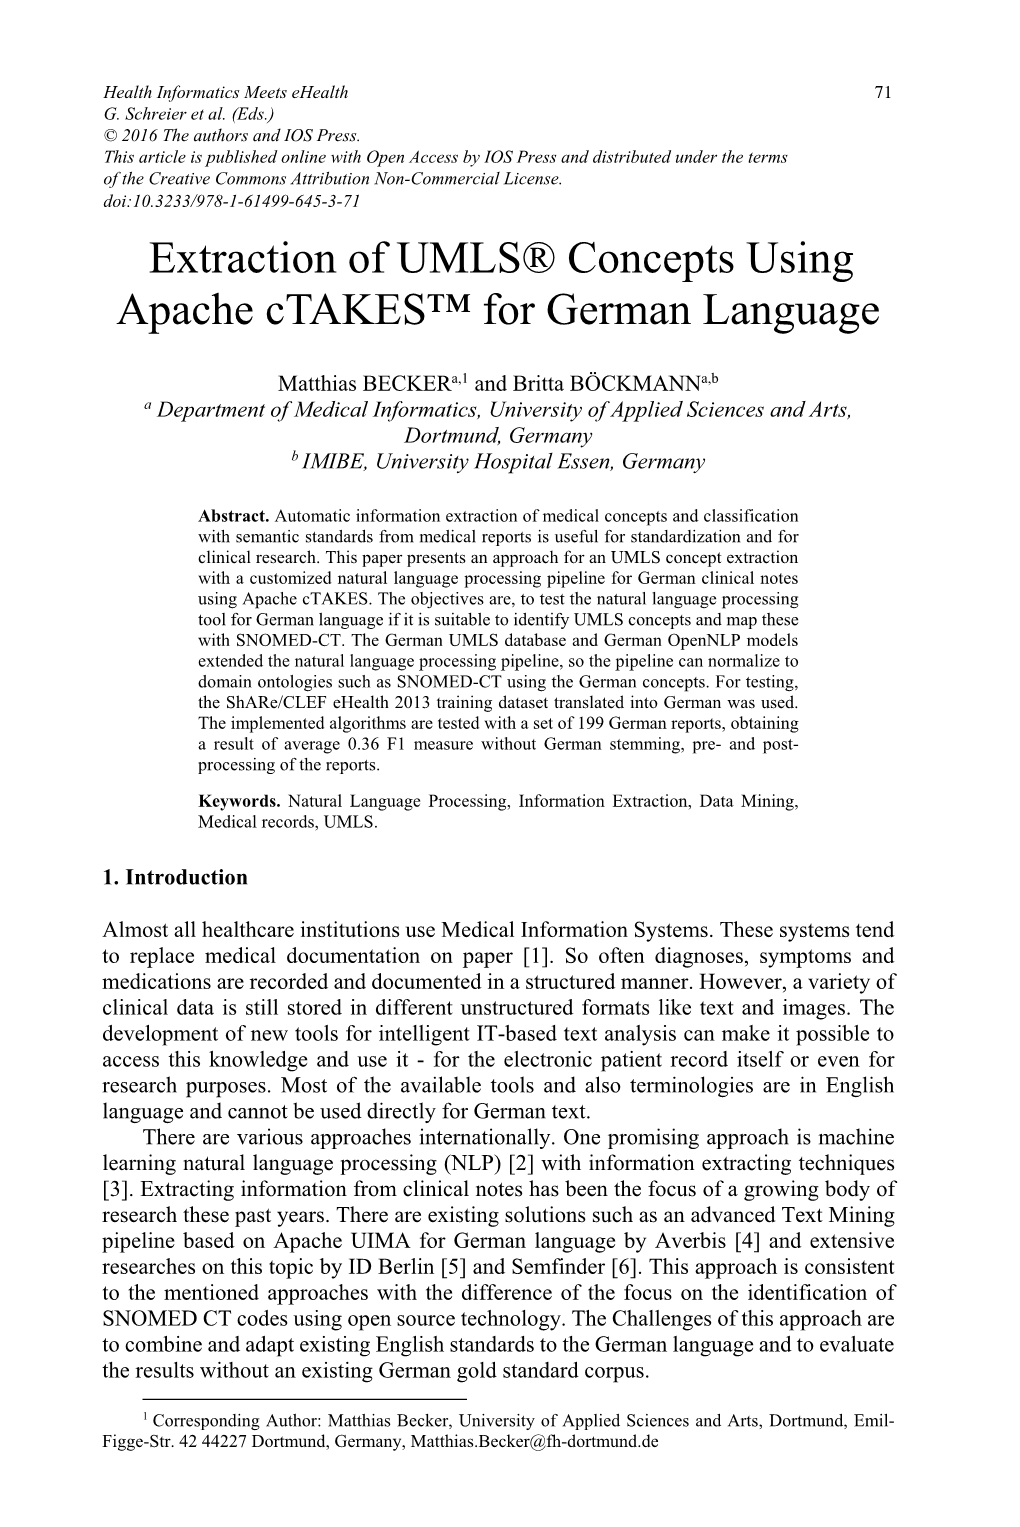 Extraction of UMLS® Concepts Using Apache Ctakes™ for German Language